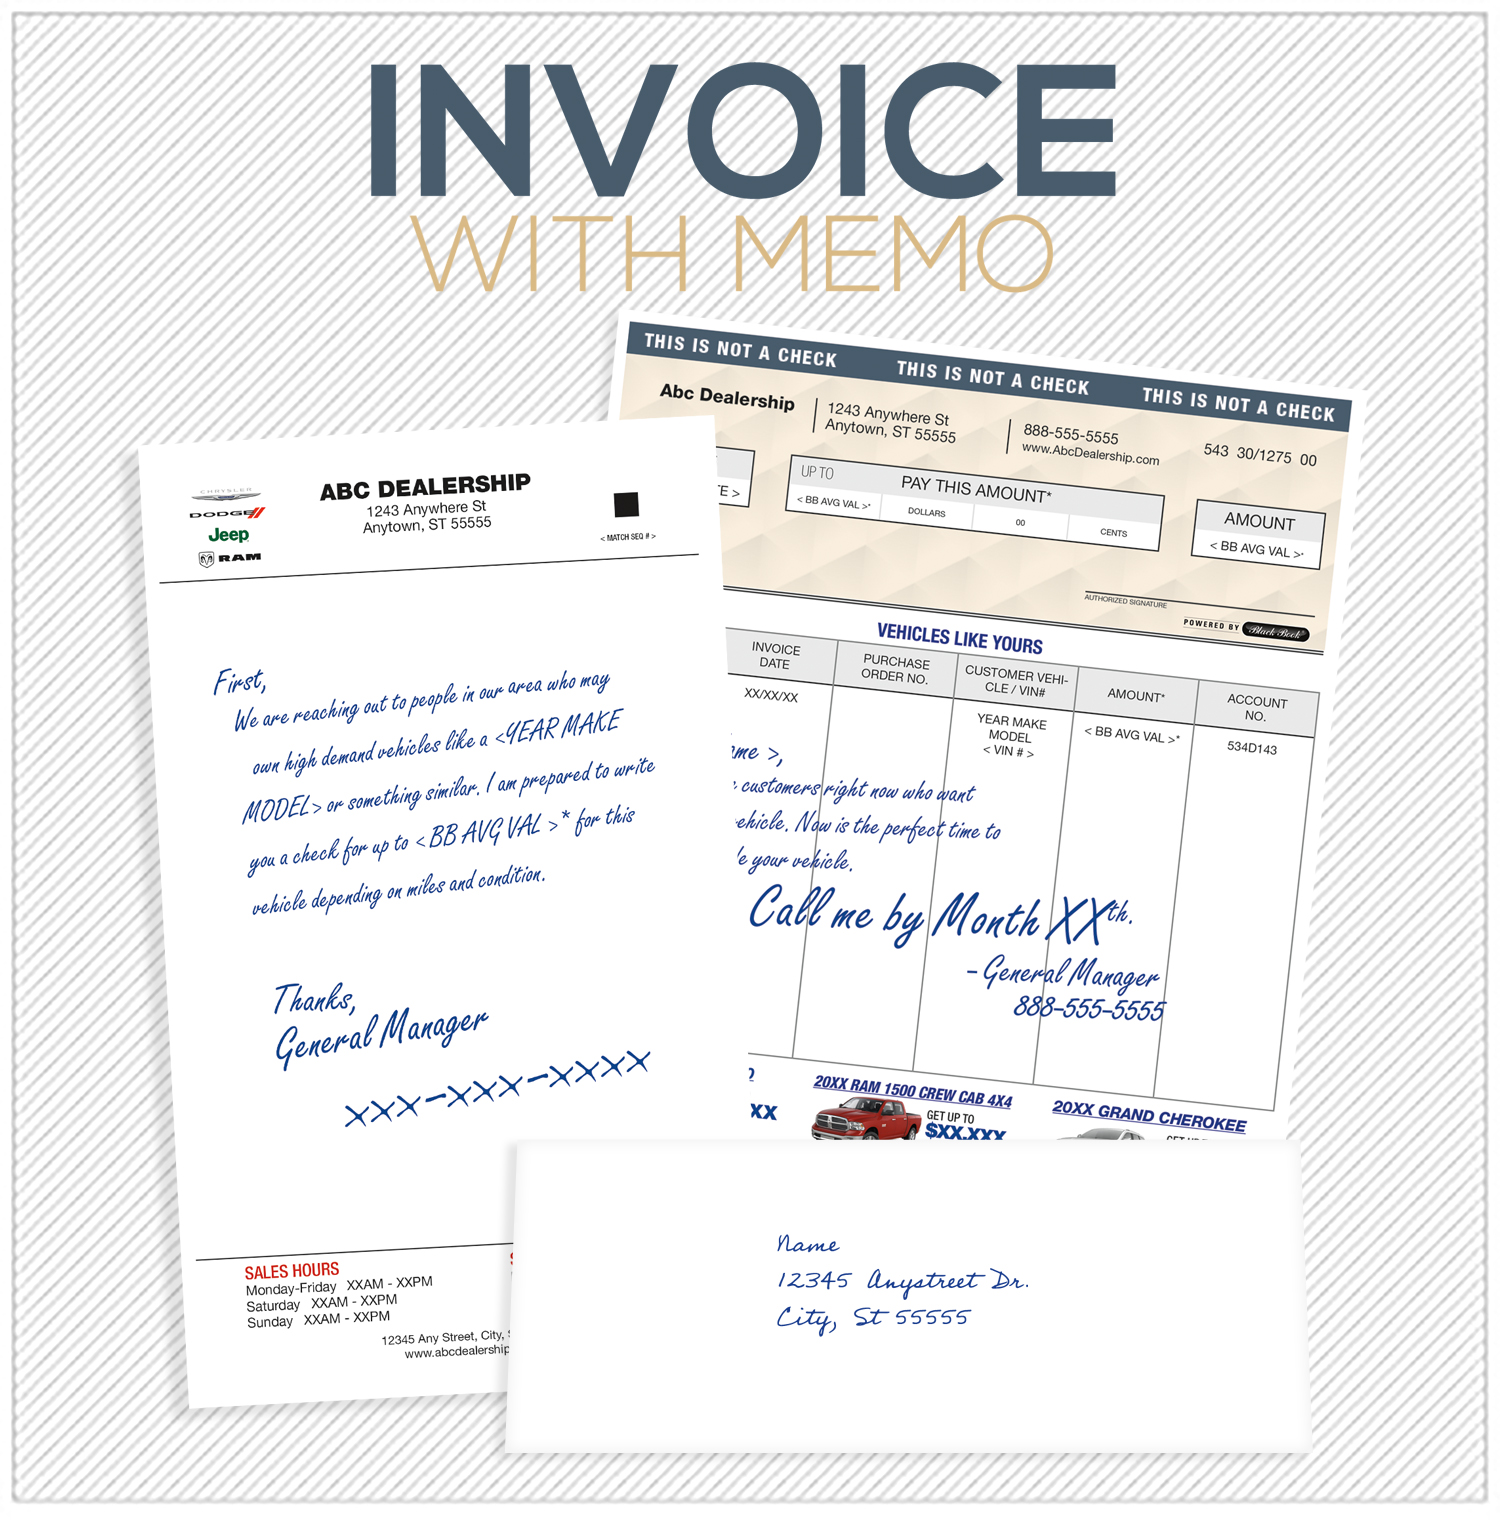 Invoice With Letter